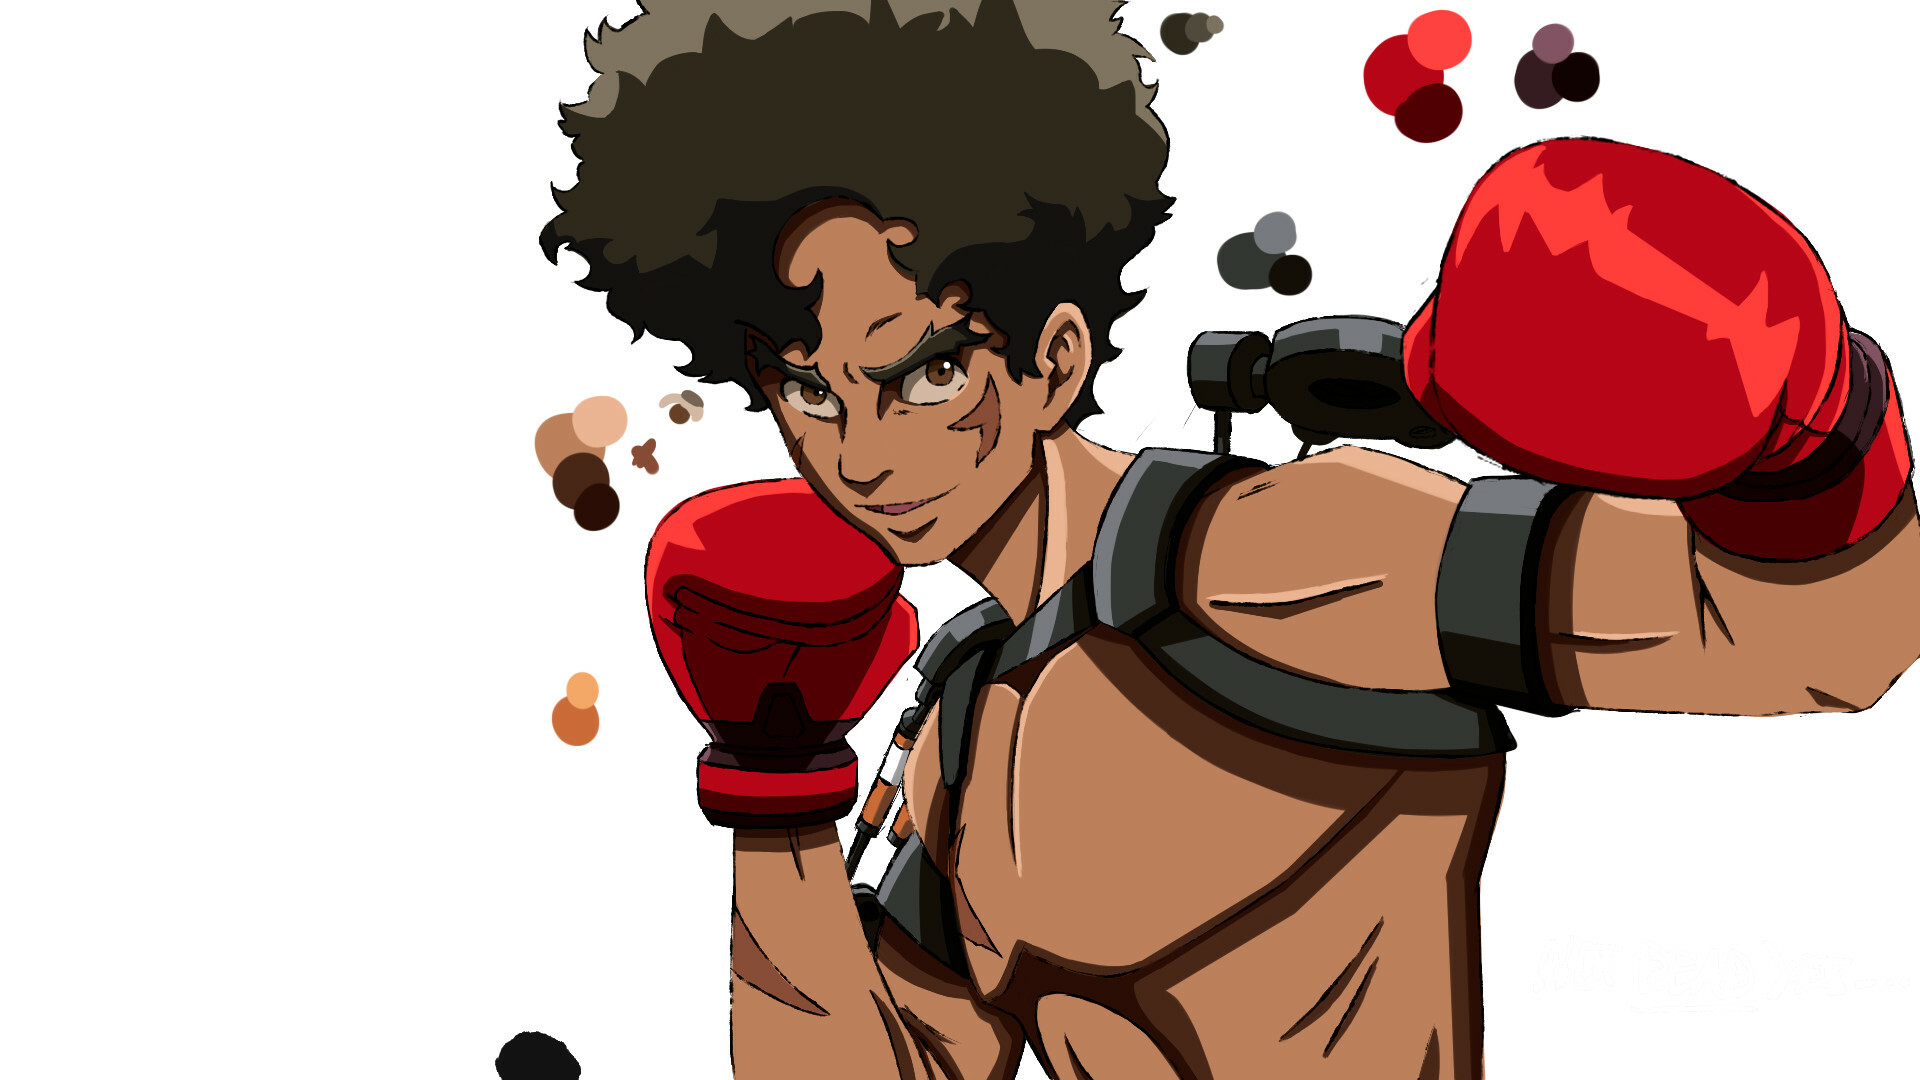 Megalo Box: The second season aired from April 4 to June 27, 2021, on Tokyo MX and BS11. 1920x1080 Full HD Wallpaper.